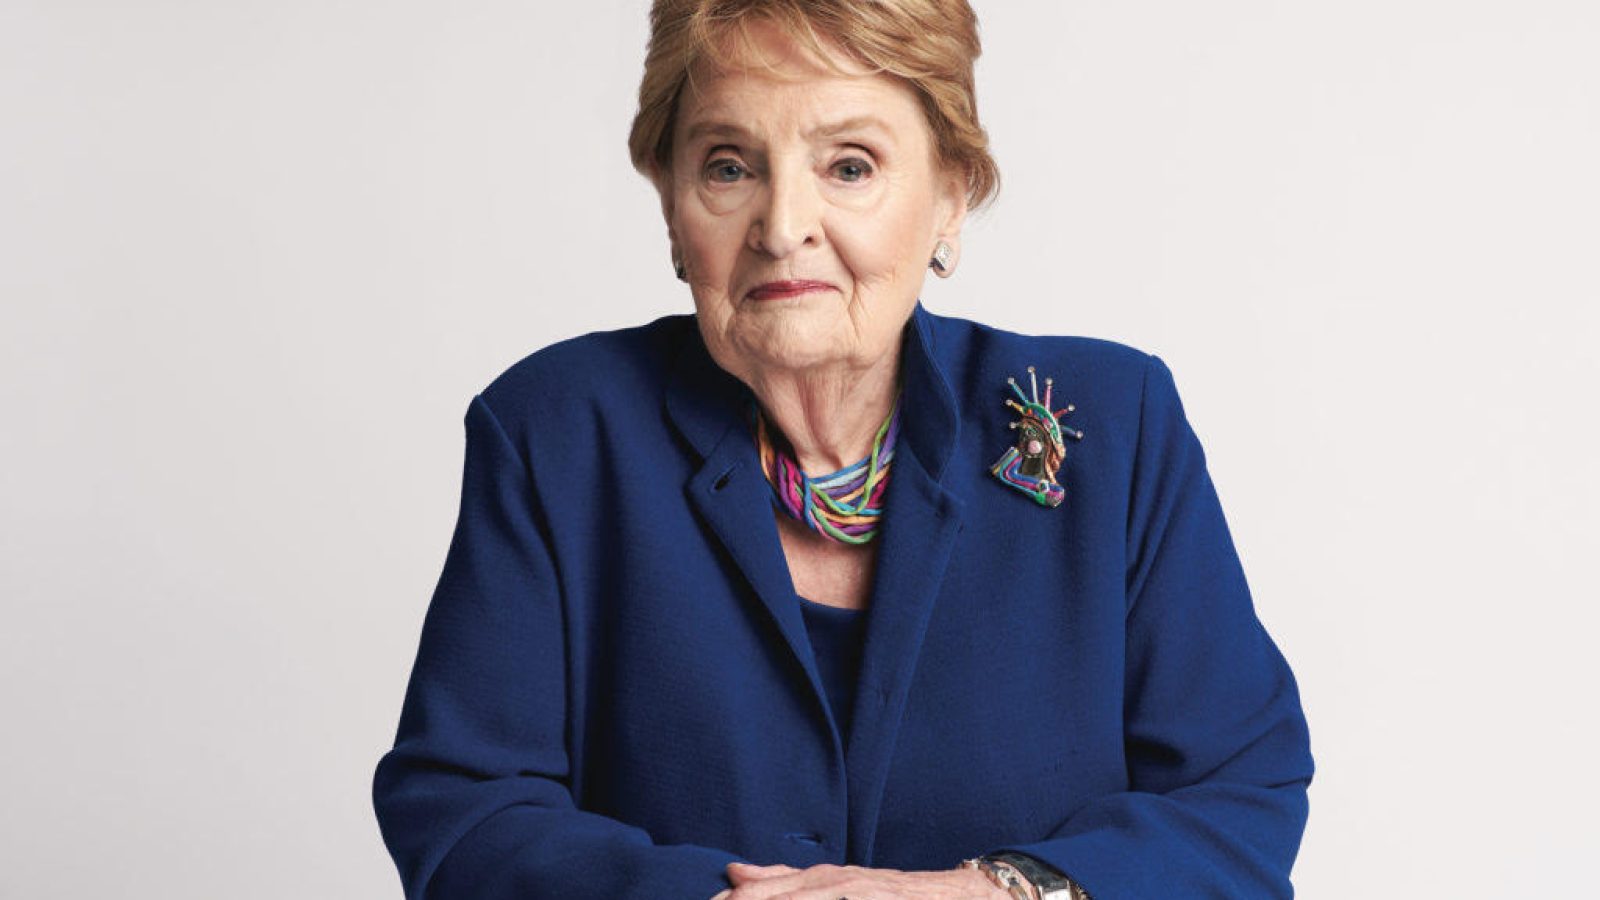 Madeleine Albright in a navy suit with a colorful necklace and blonde hair